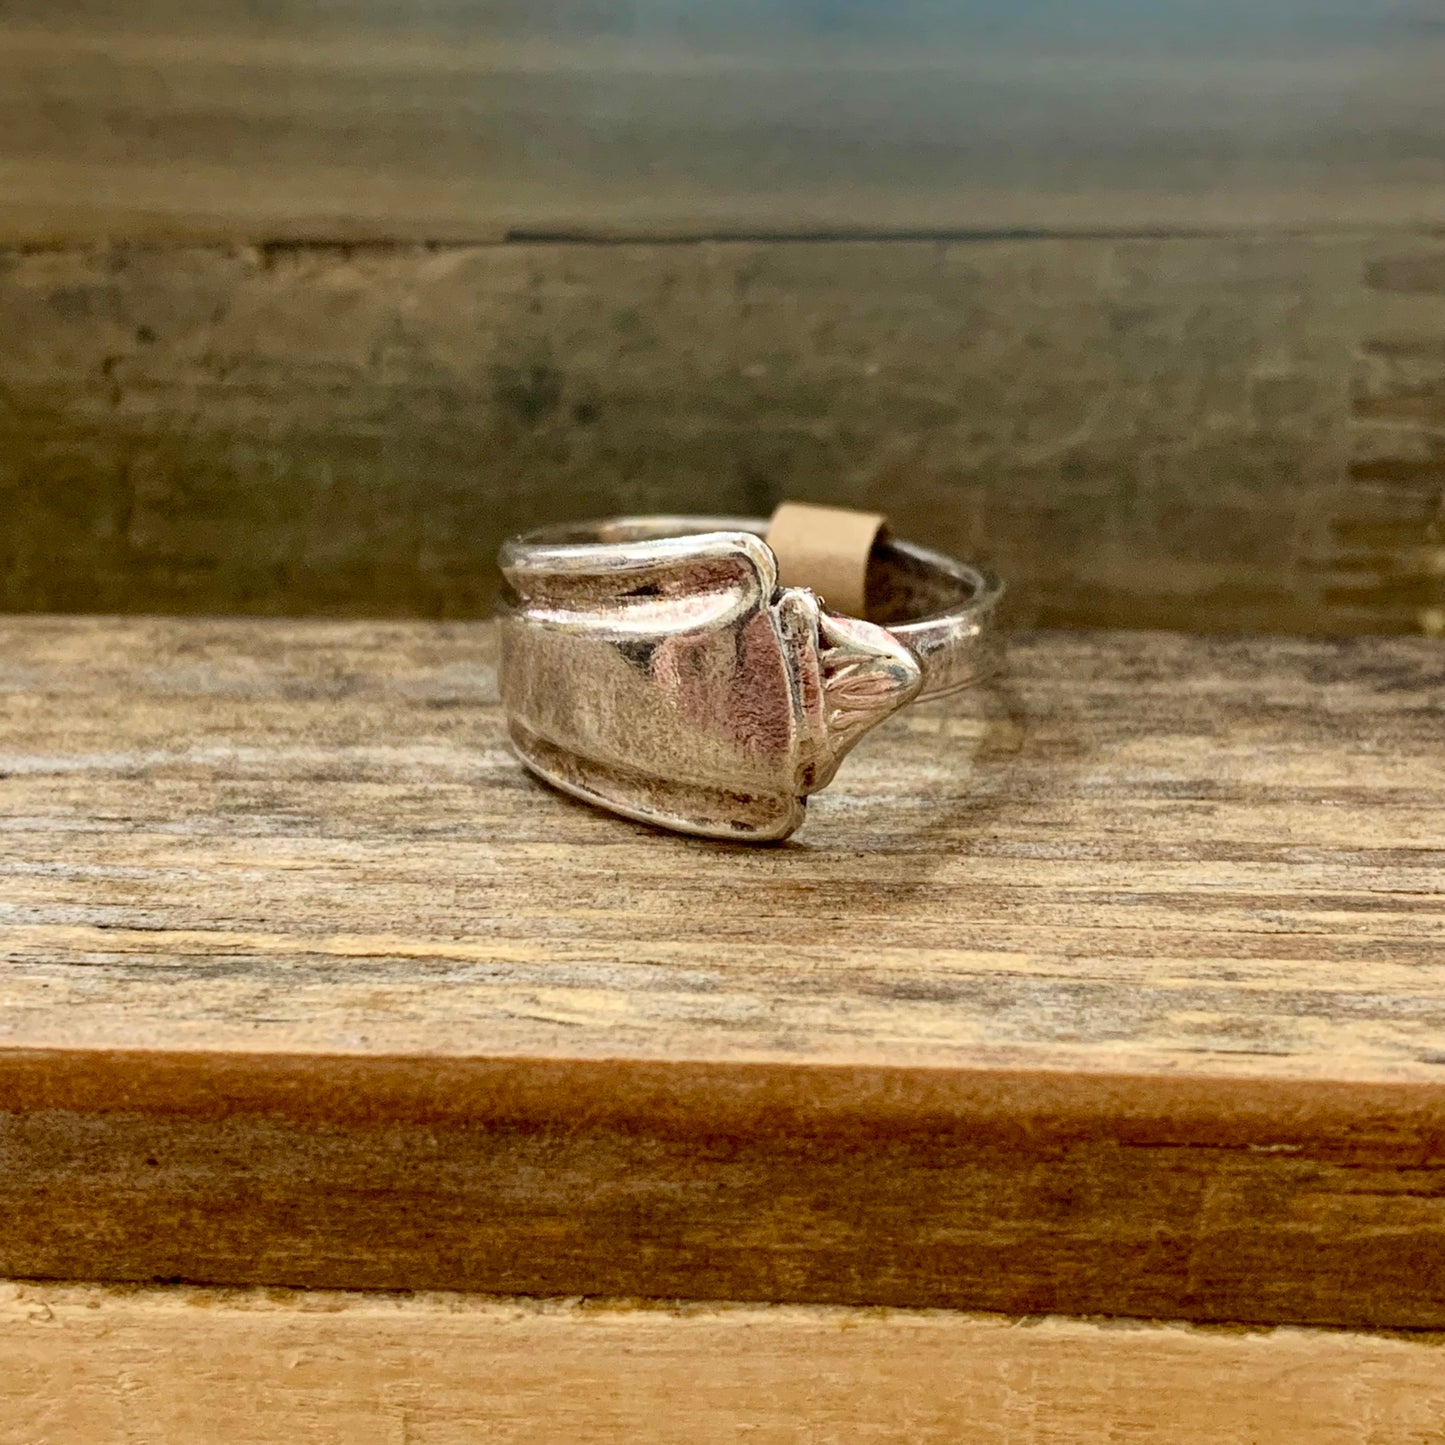 MOLLY MADE - Silverware Ring #9- Point